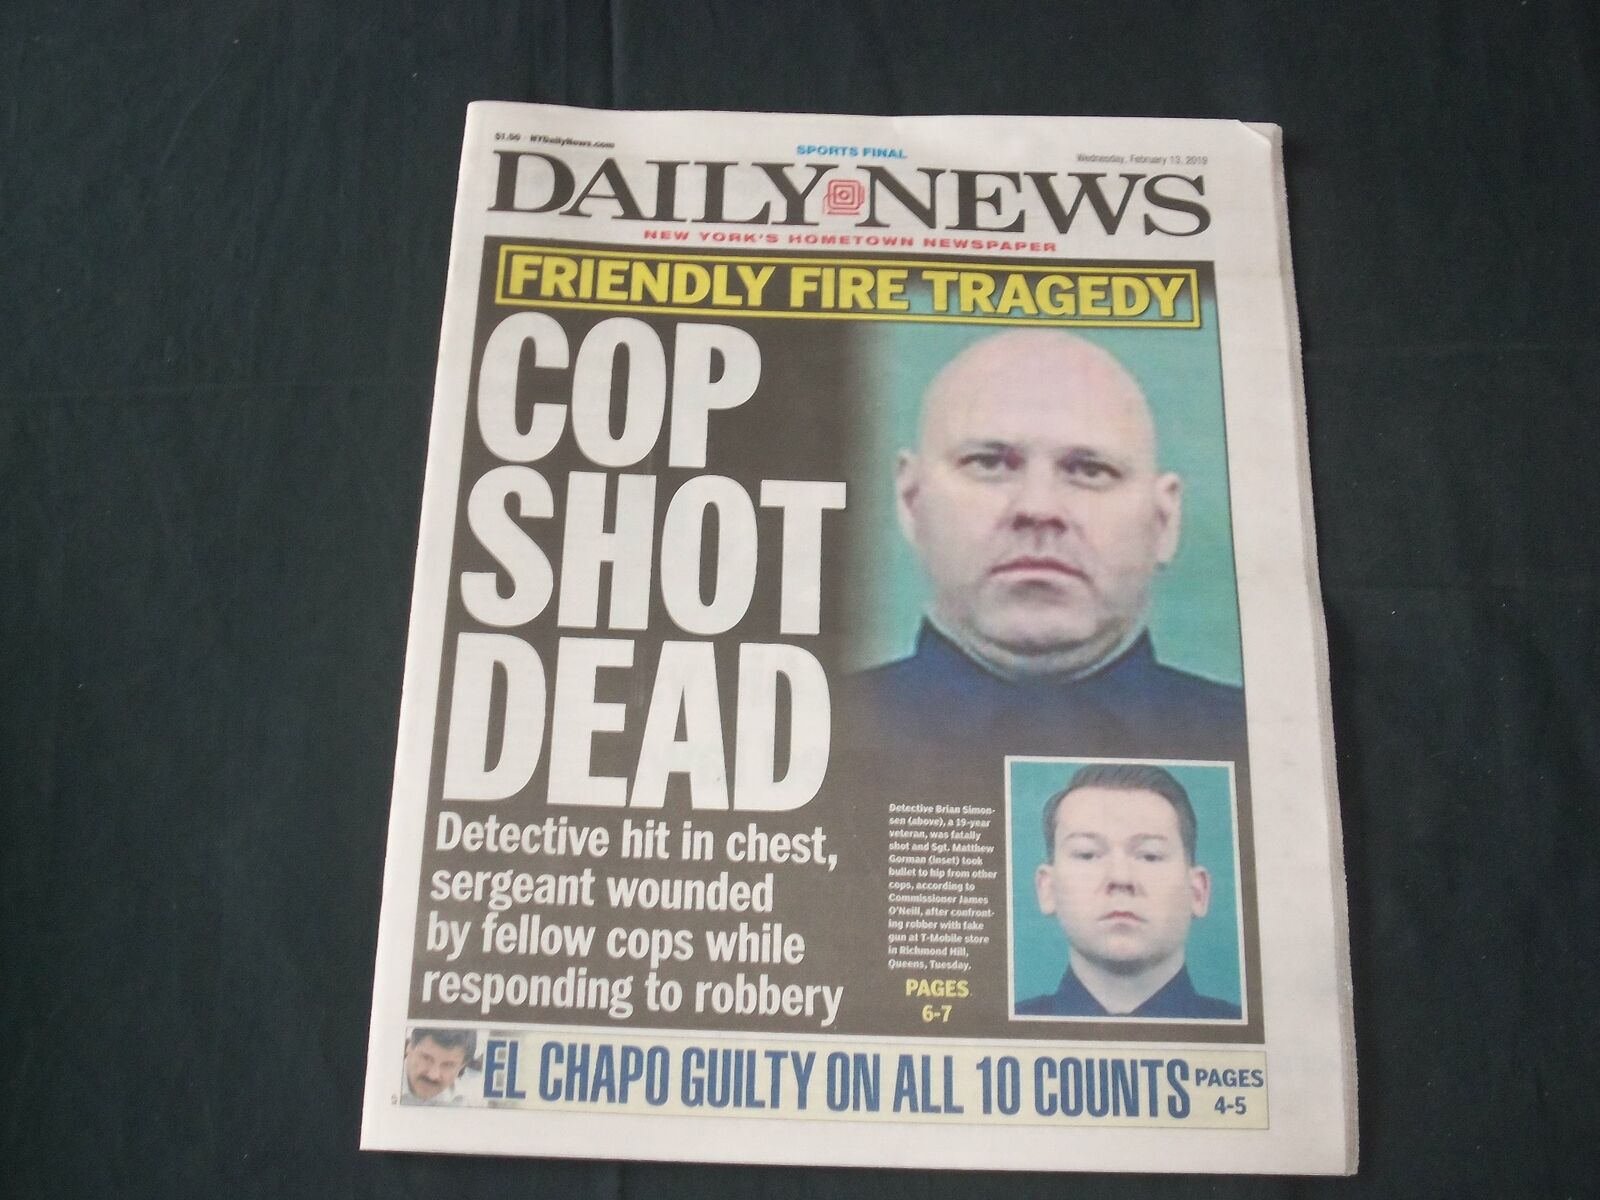 2019 FEBRUARY 13 NEW YORK DAILY NEWS - COP SHOT DEAD - FRIENDLY FIRE TRAGEDY